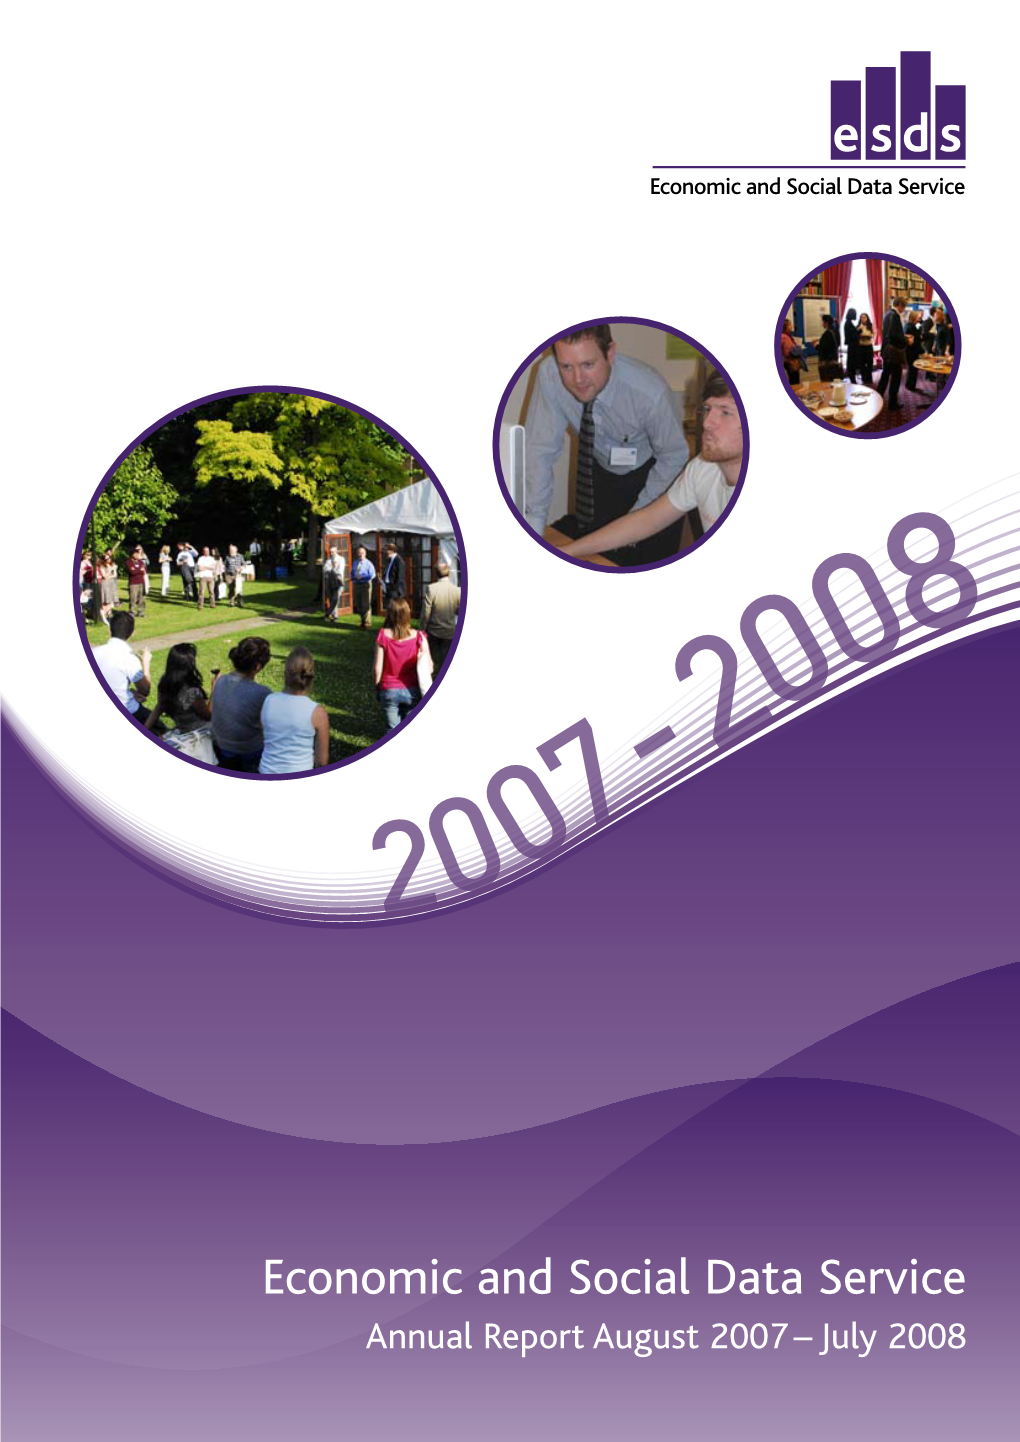 ESDS Annual Report, 2007-2008